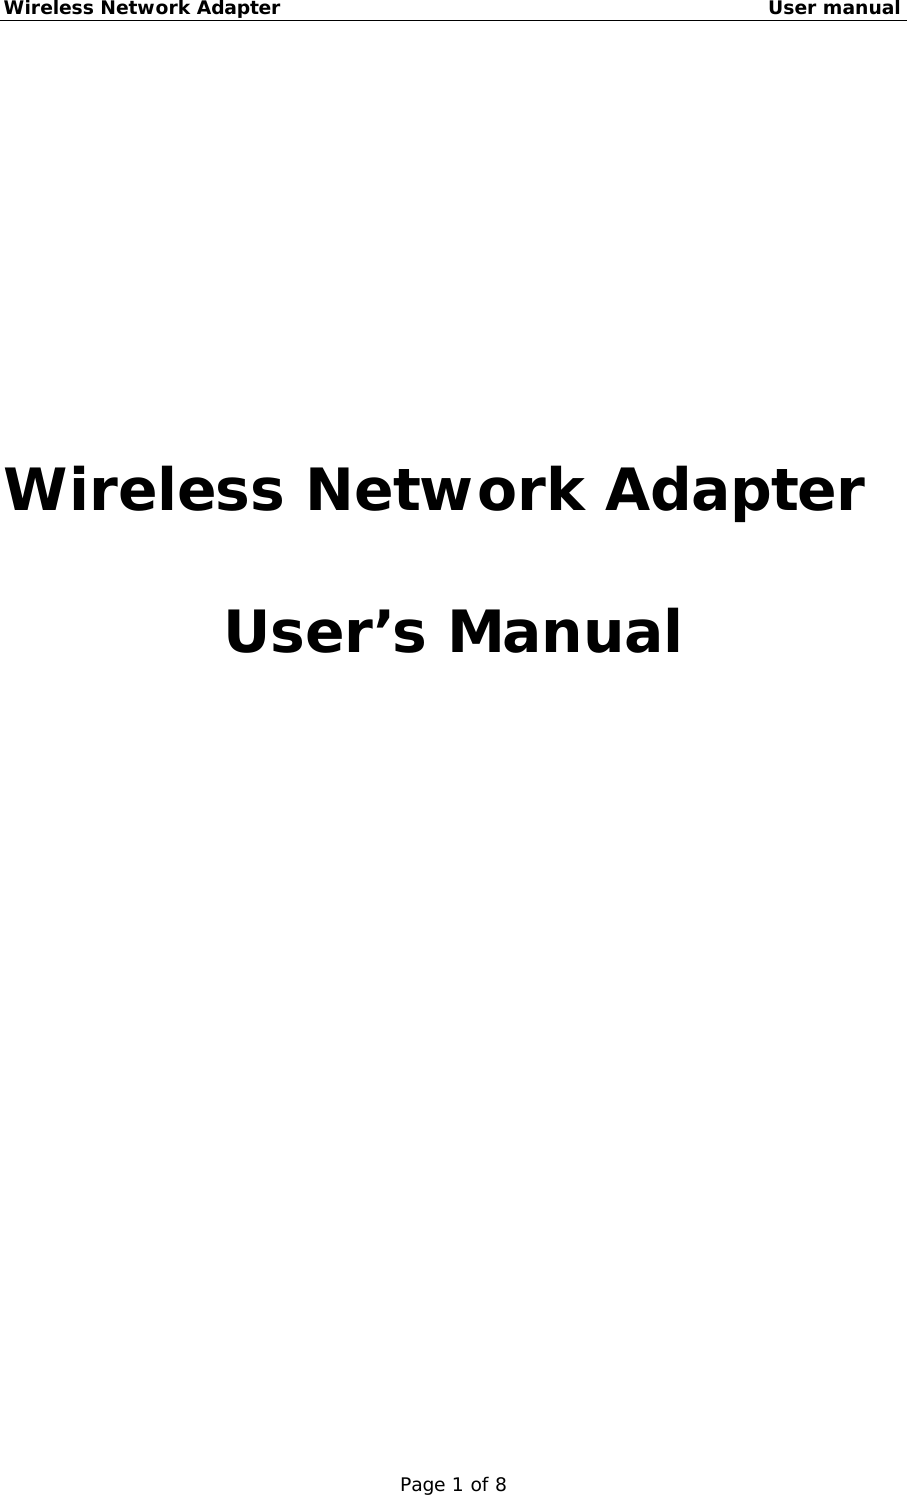 Wireless Network Adapter                                                    User manual Page 1 of 8       Wireless Network Adapter  User’s Manual                    